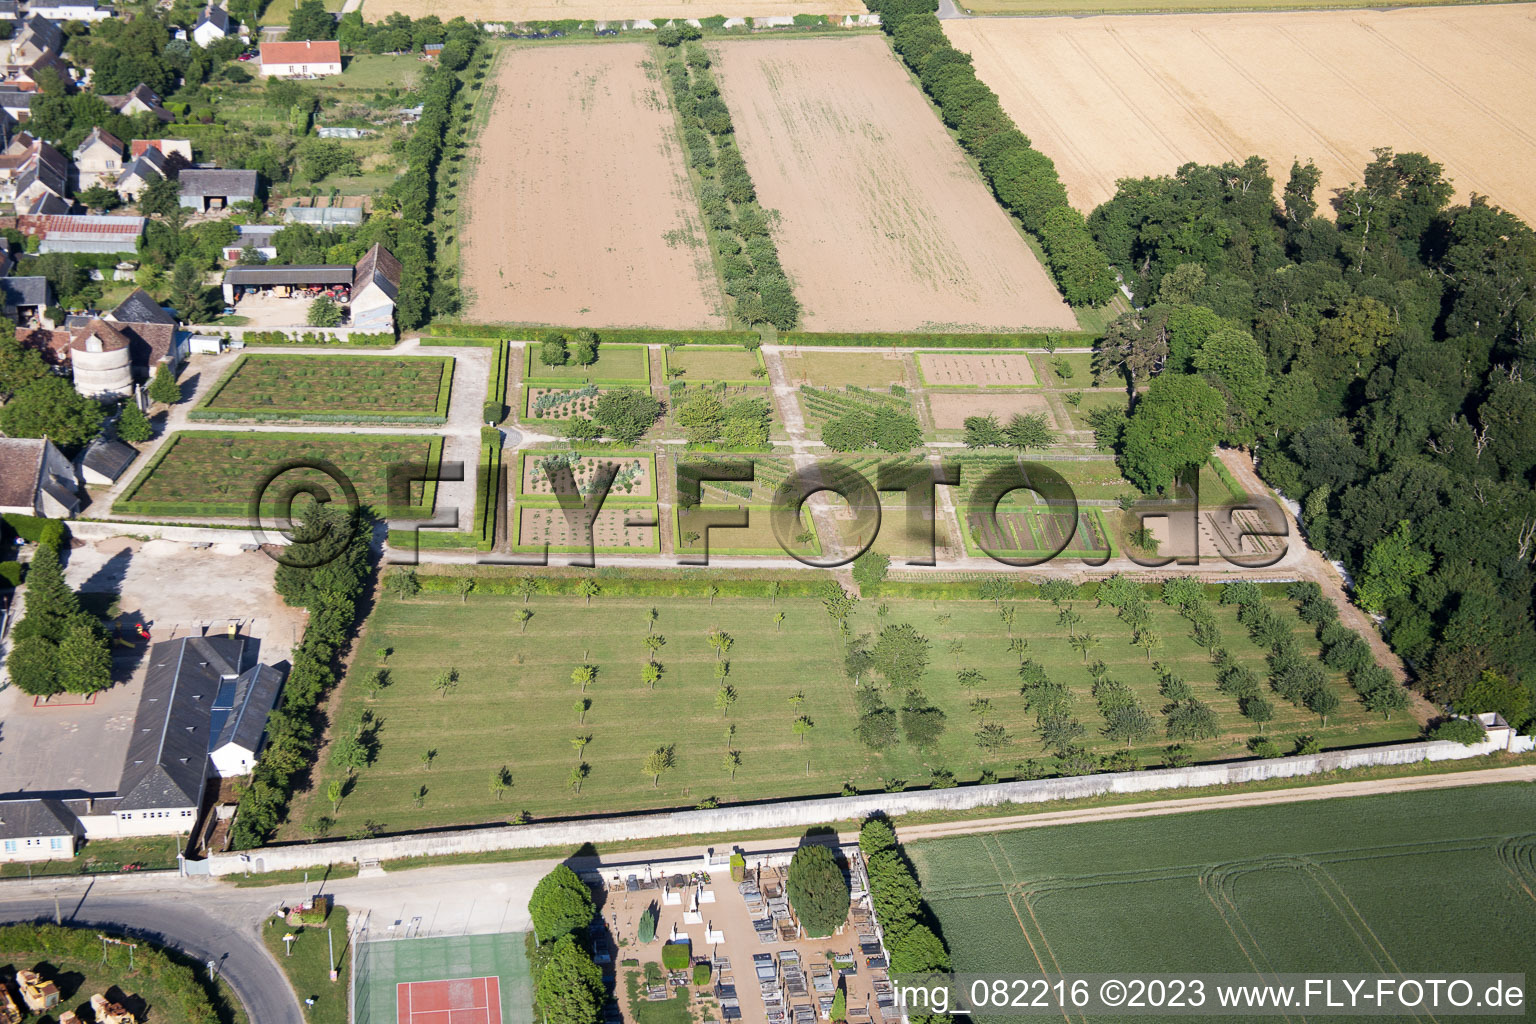 Talcy in the state Loir et Cher, France from above